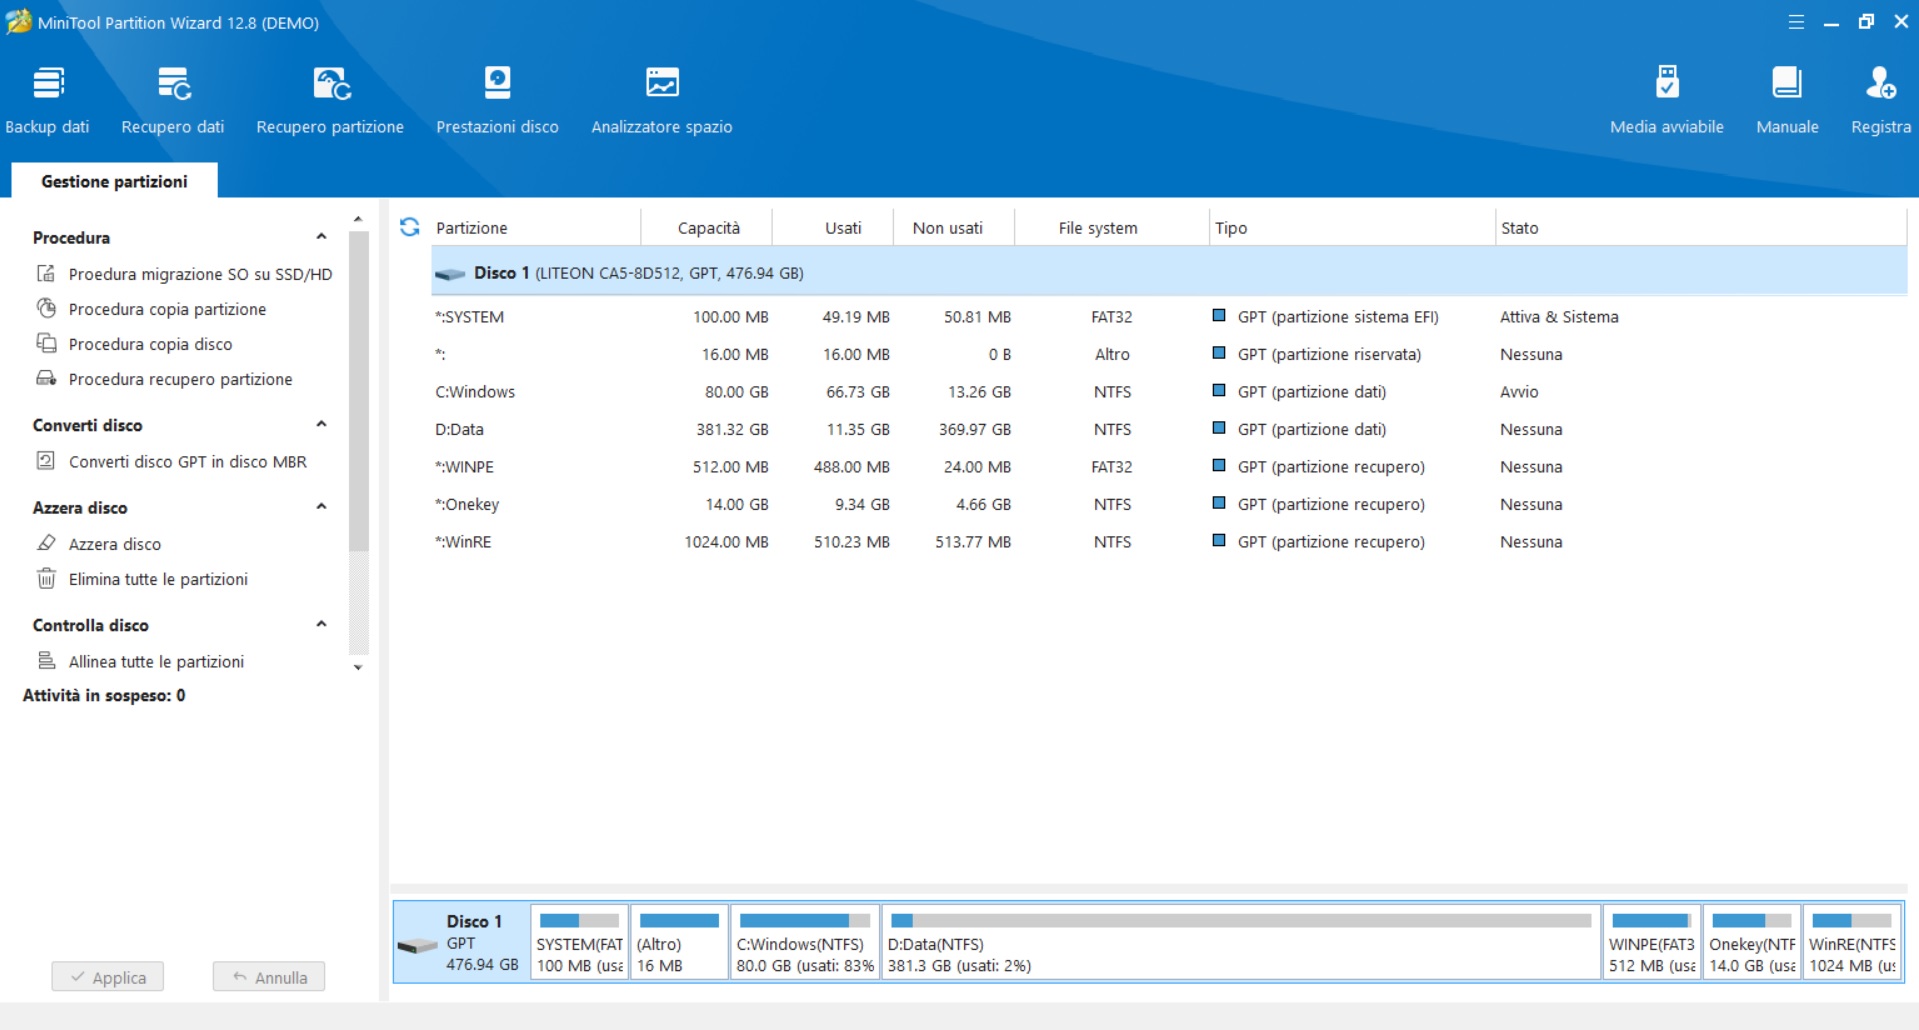 Minitool Partition Wizard 12.8: how to better manage your hard disk